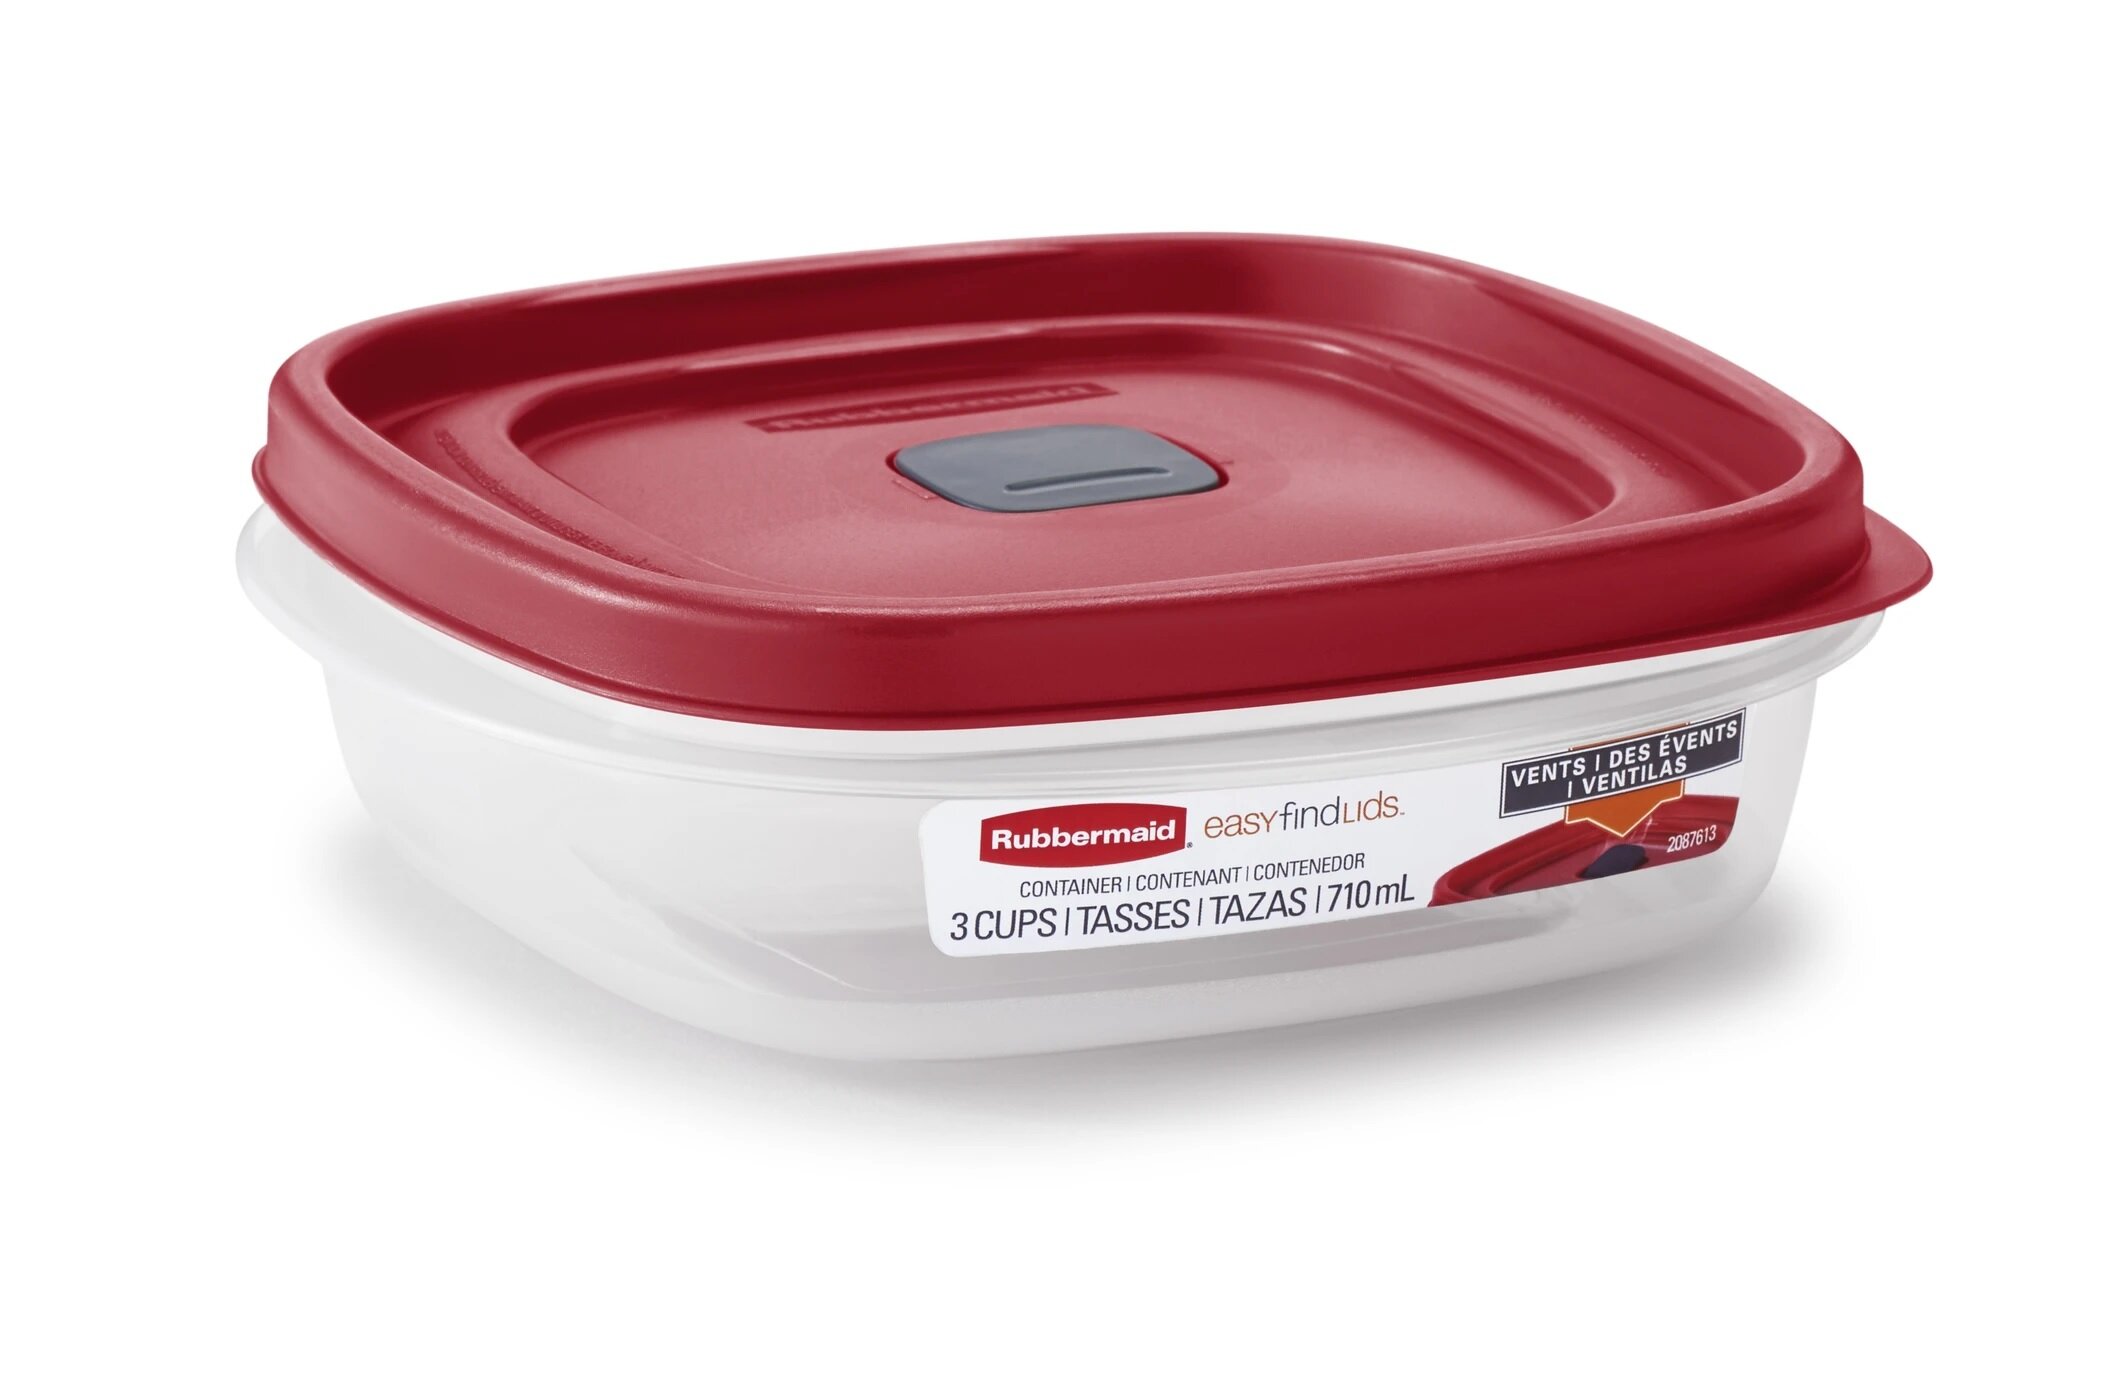 Rubbermaid Easy Find Lids Food Storage Containers, 4-Piece Set